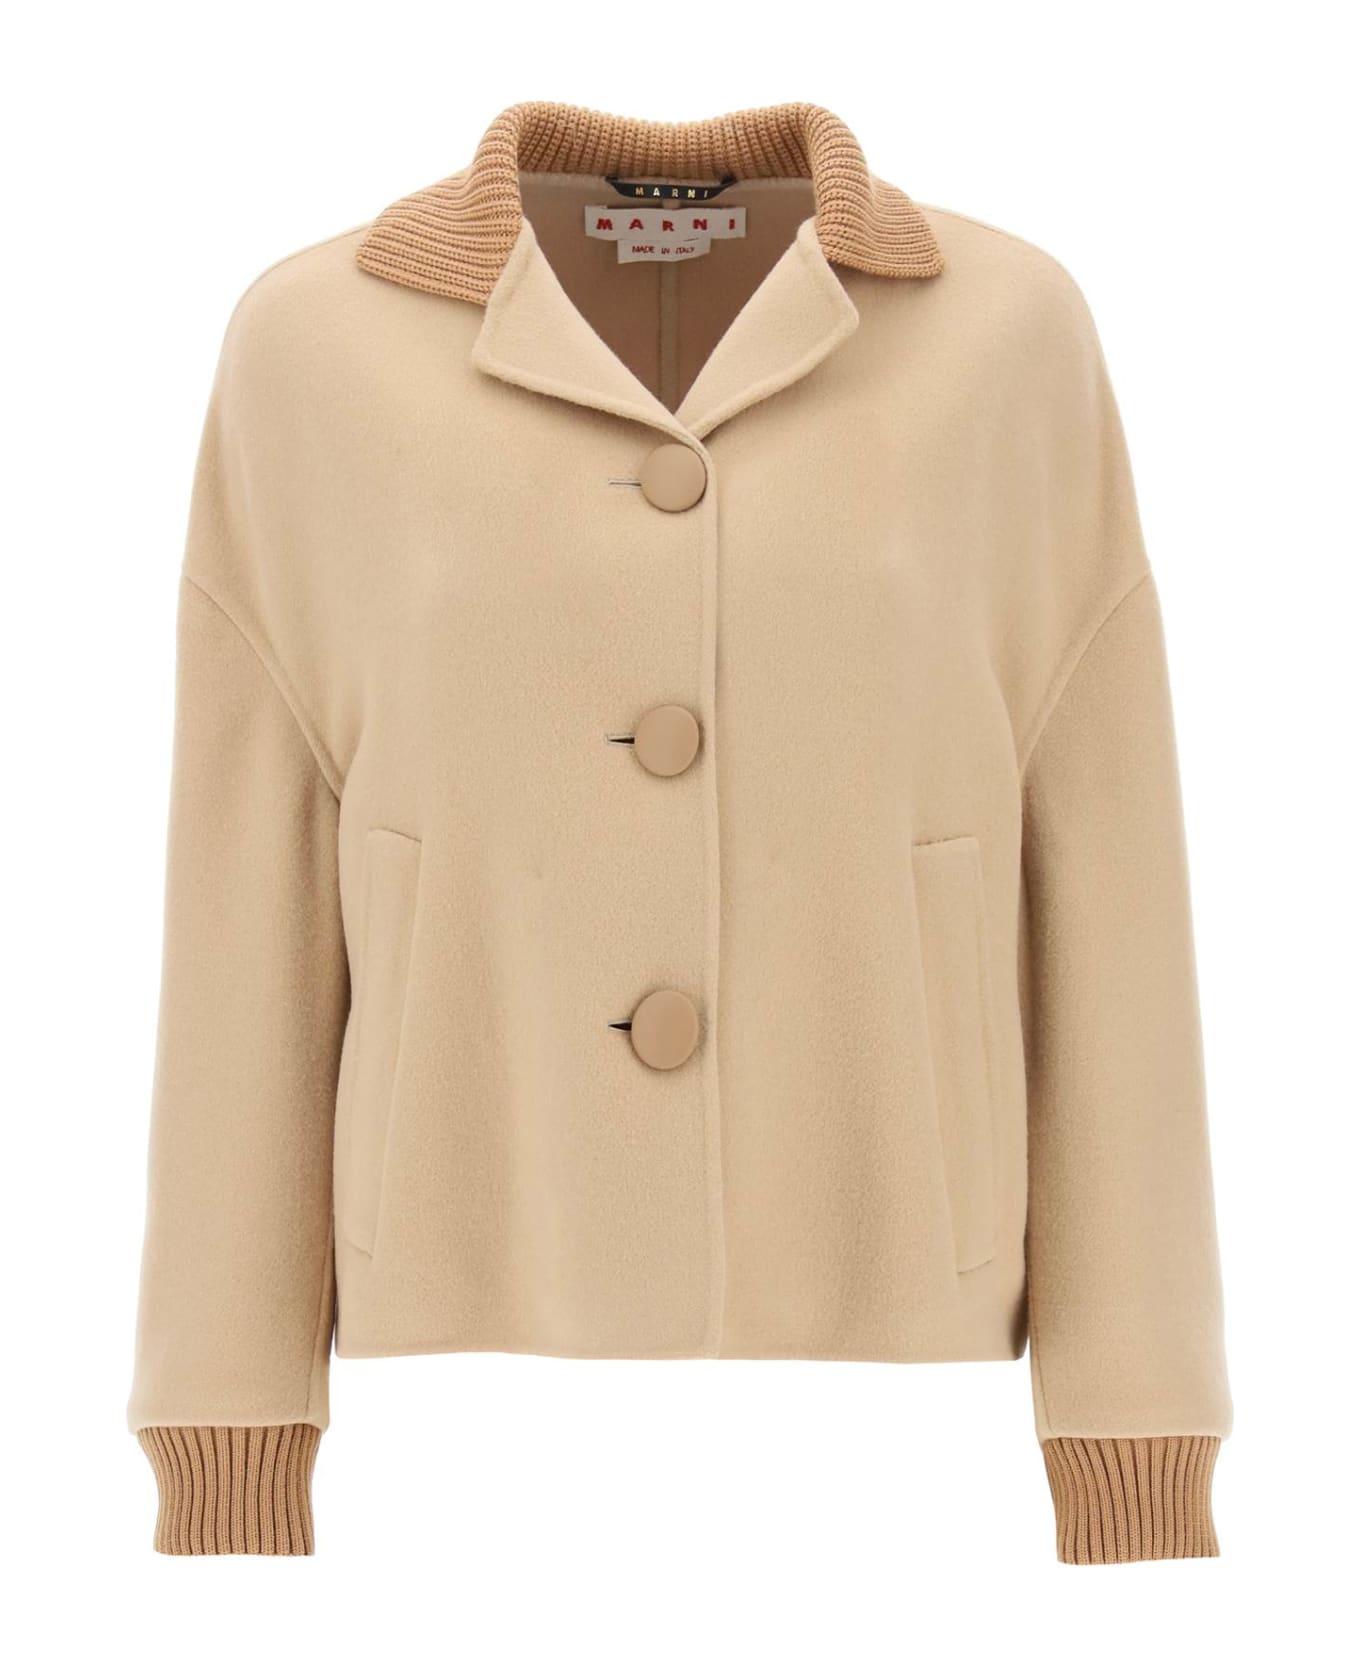 Marni Wool And Cashmere Caban - Beige